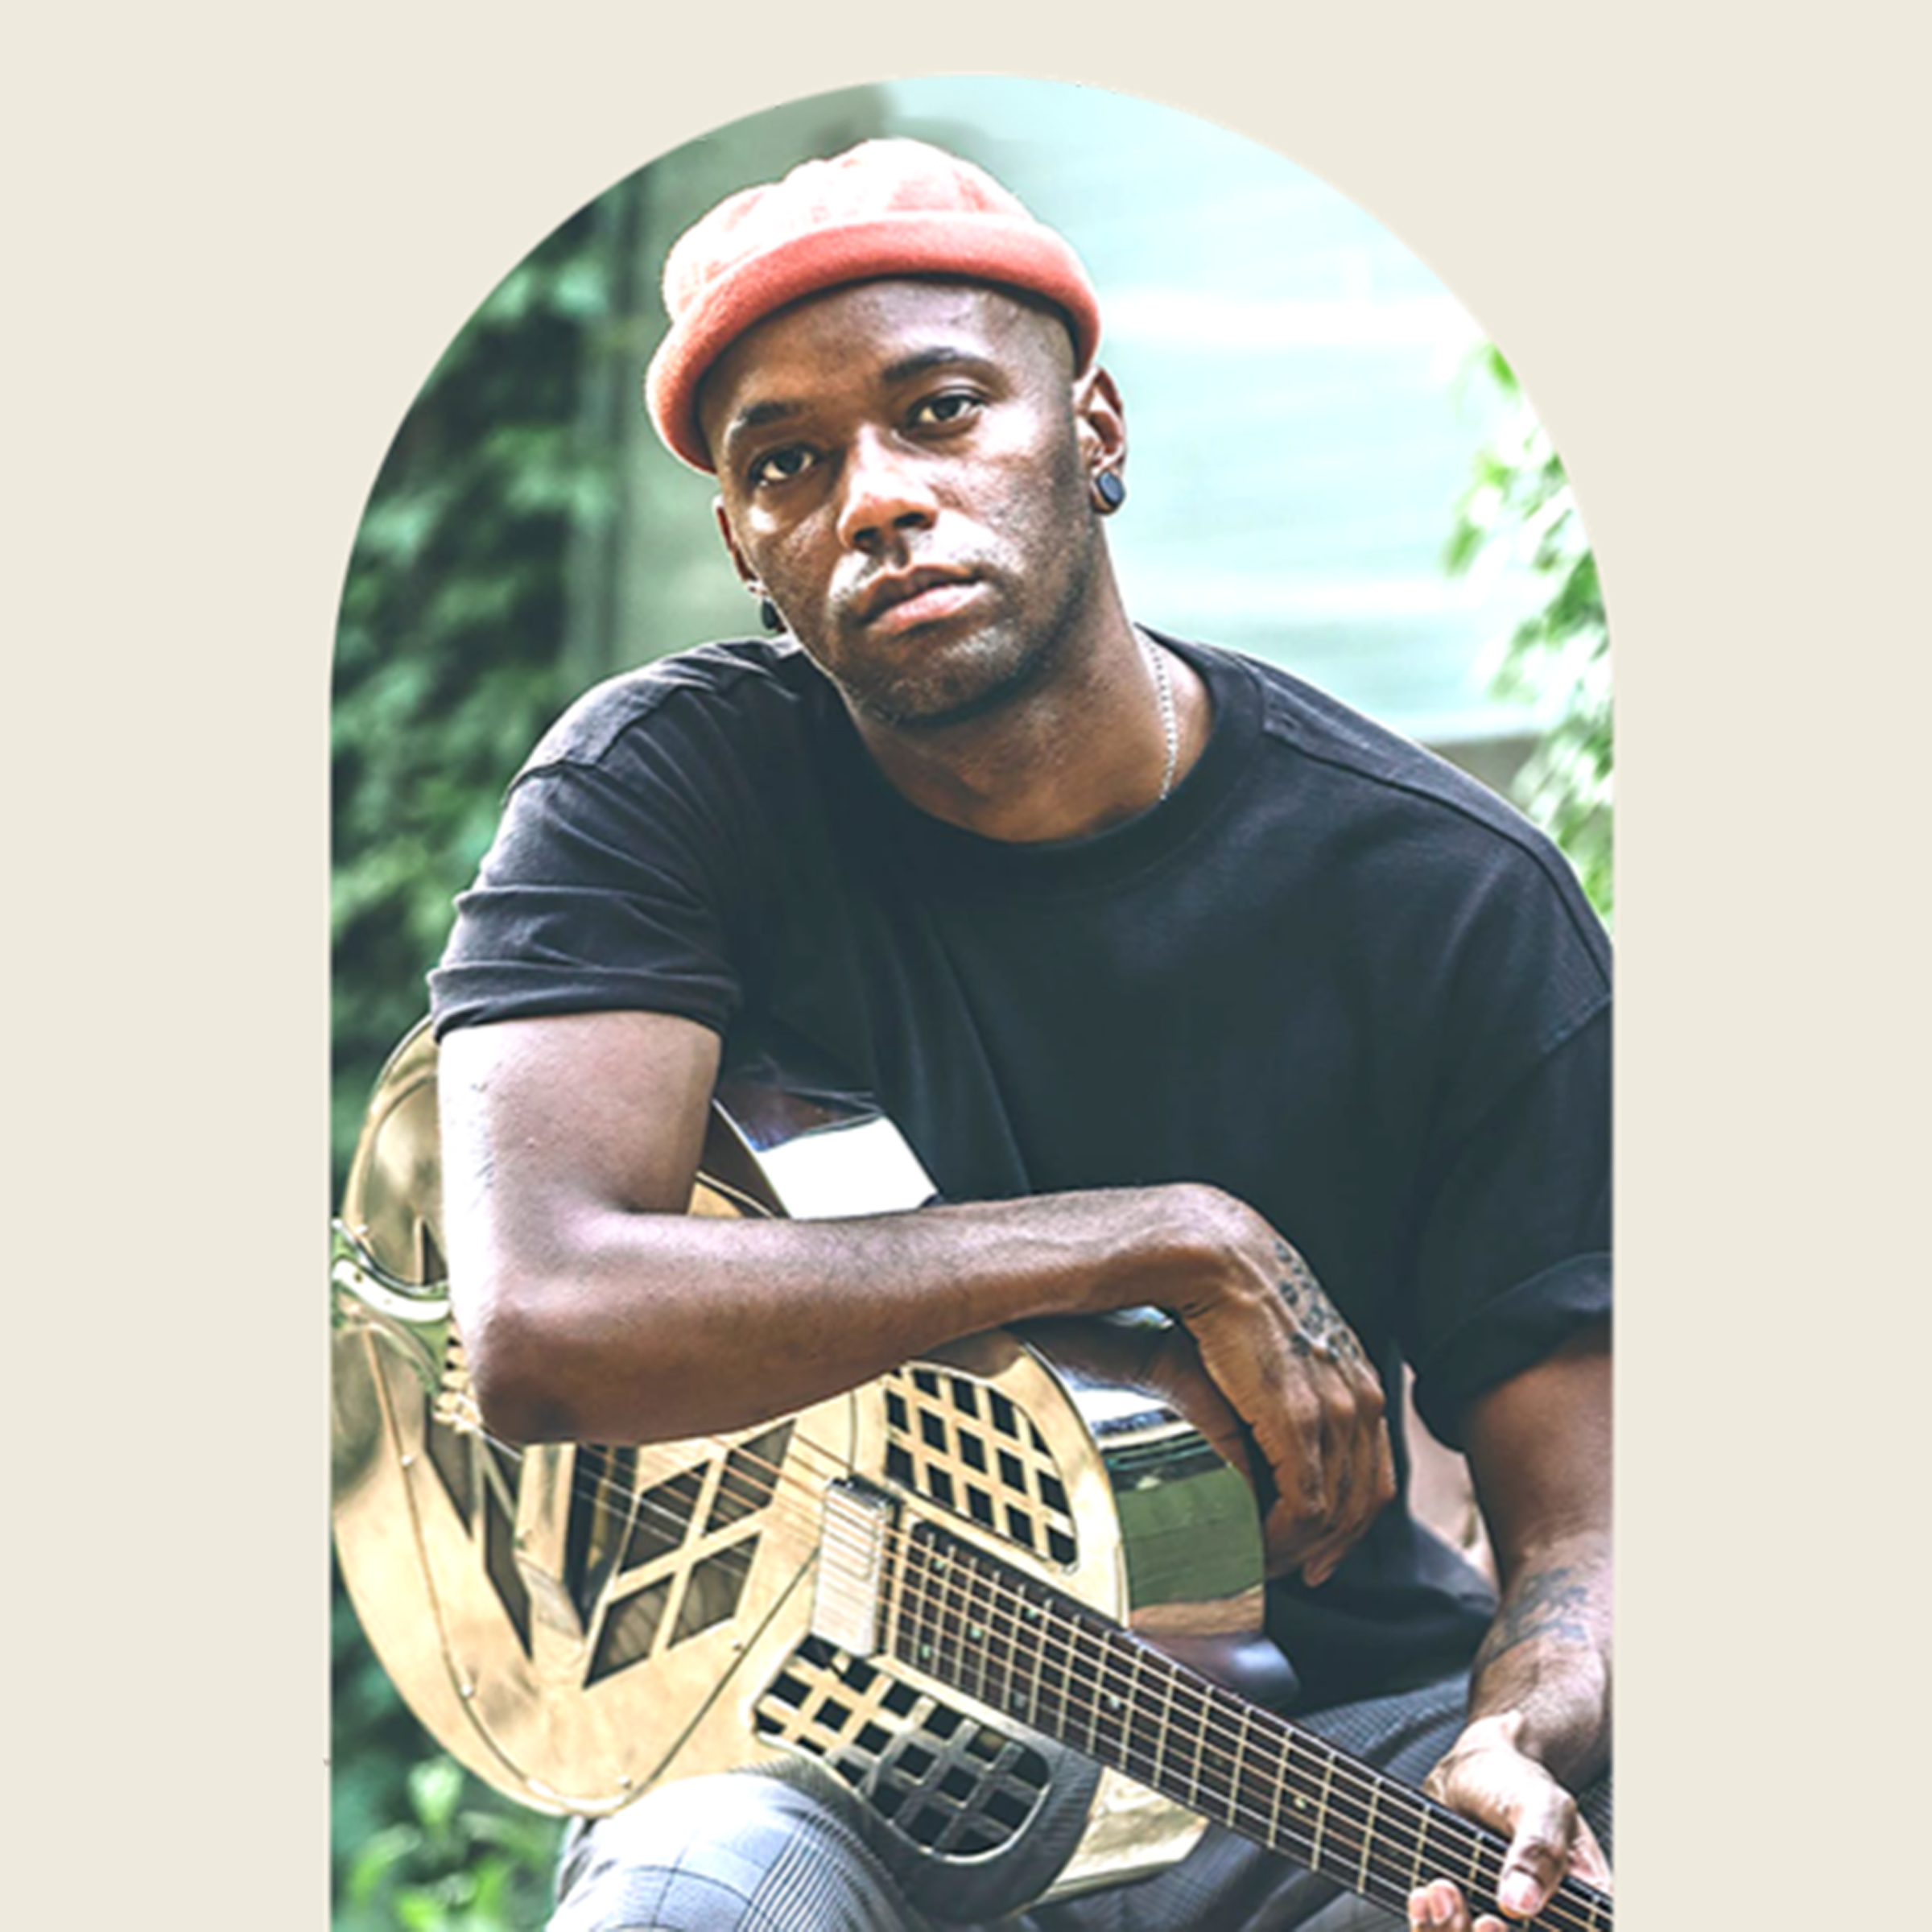 SMALL WORLD: Guitarist Lionel Loueke Brings Gentility to ‘The Journey’